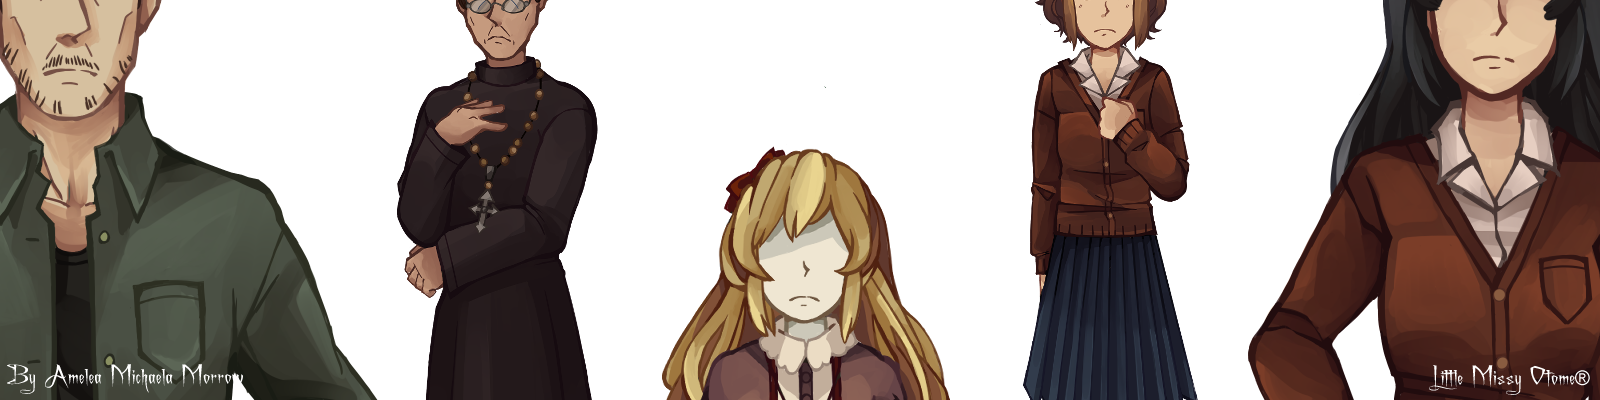 Won't you stay? Remastered